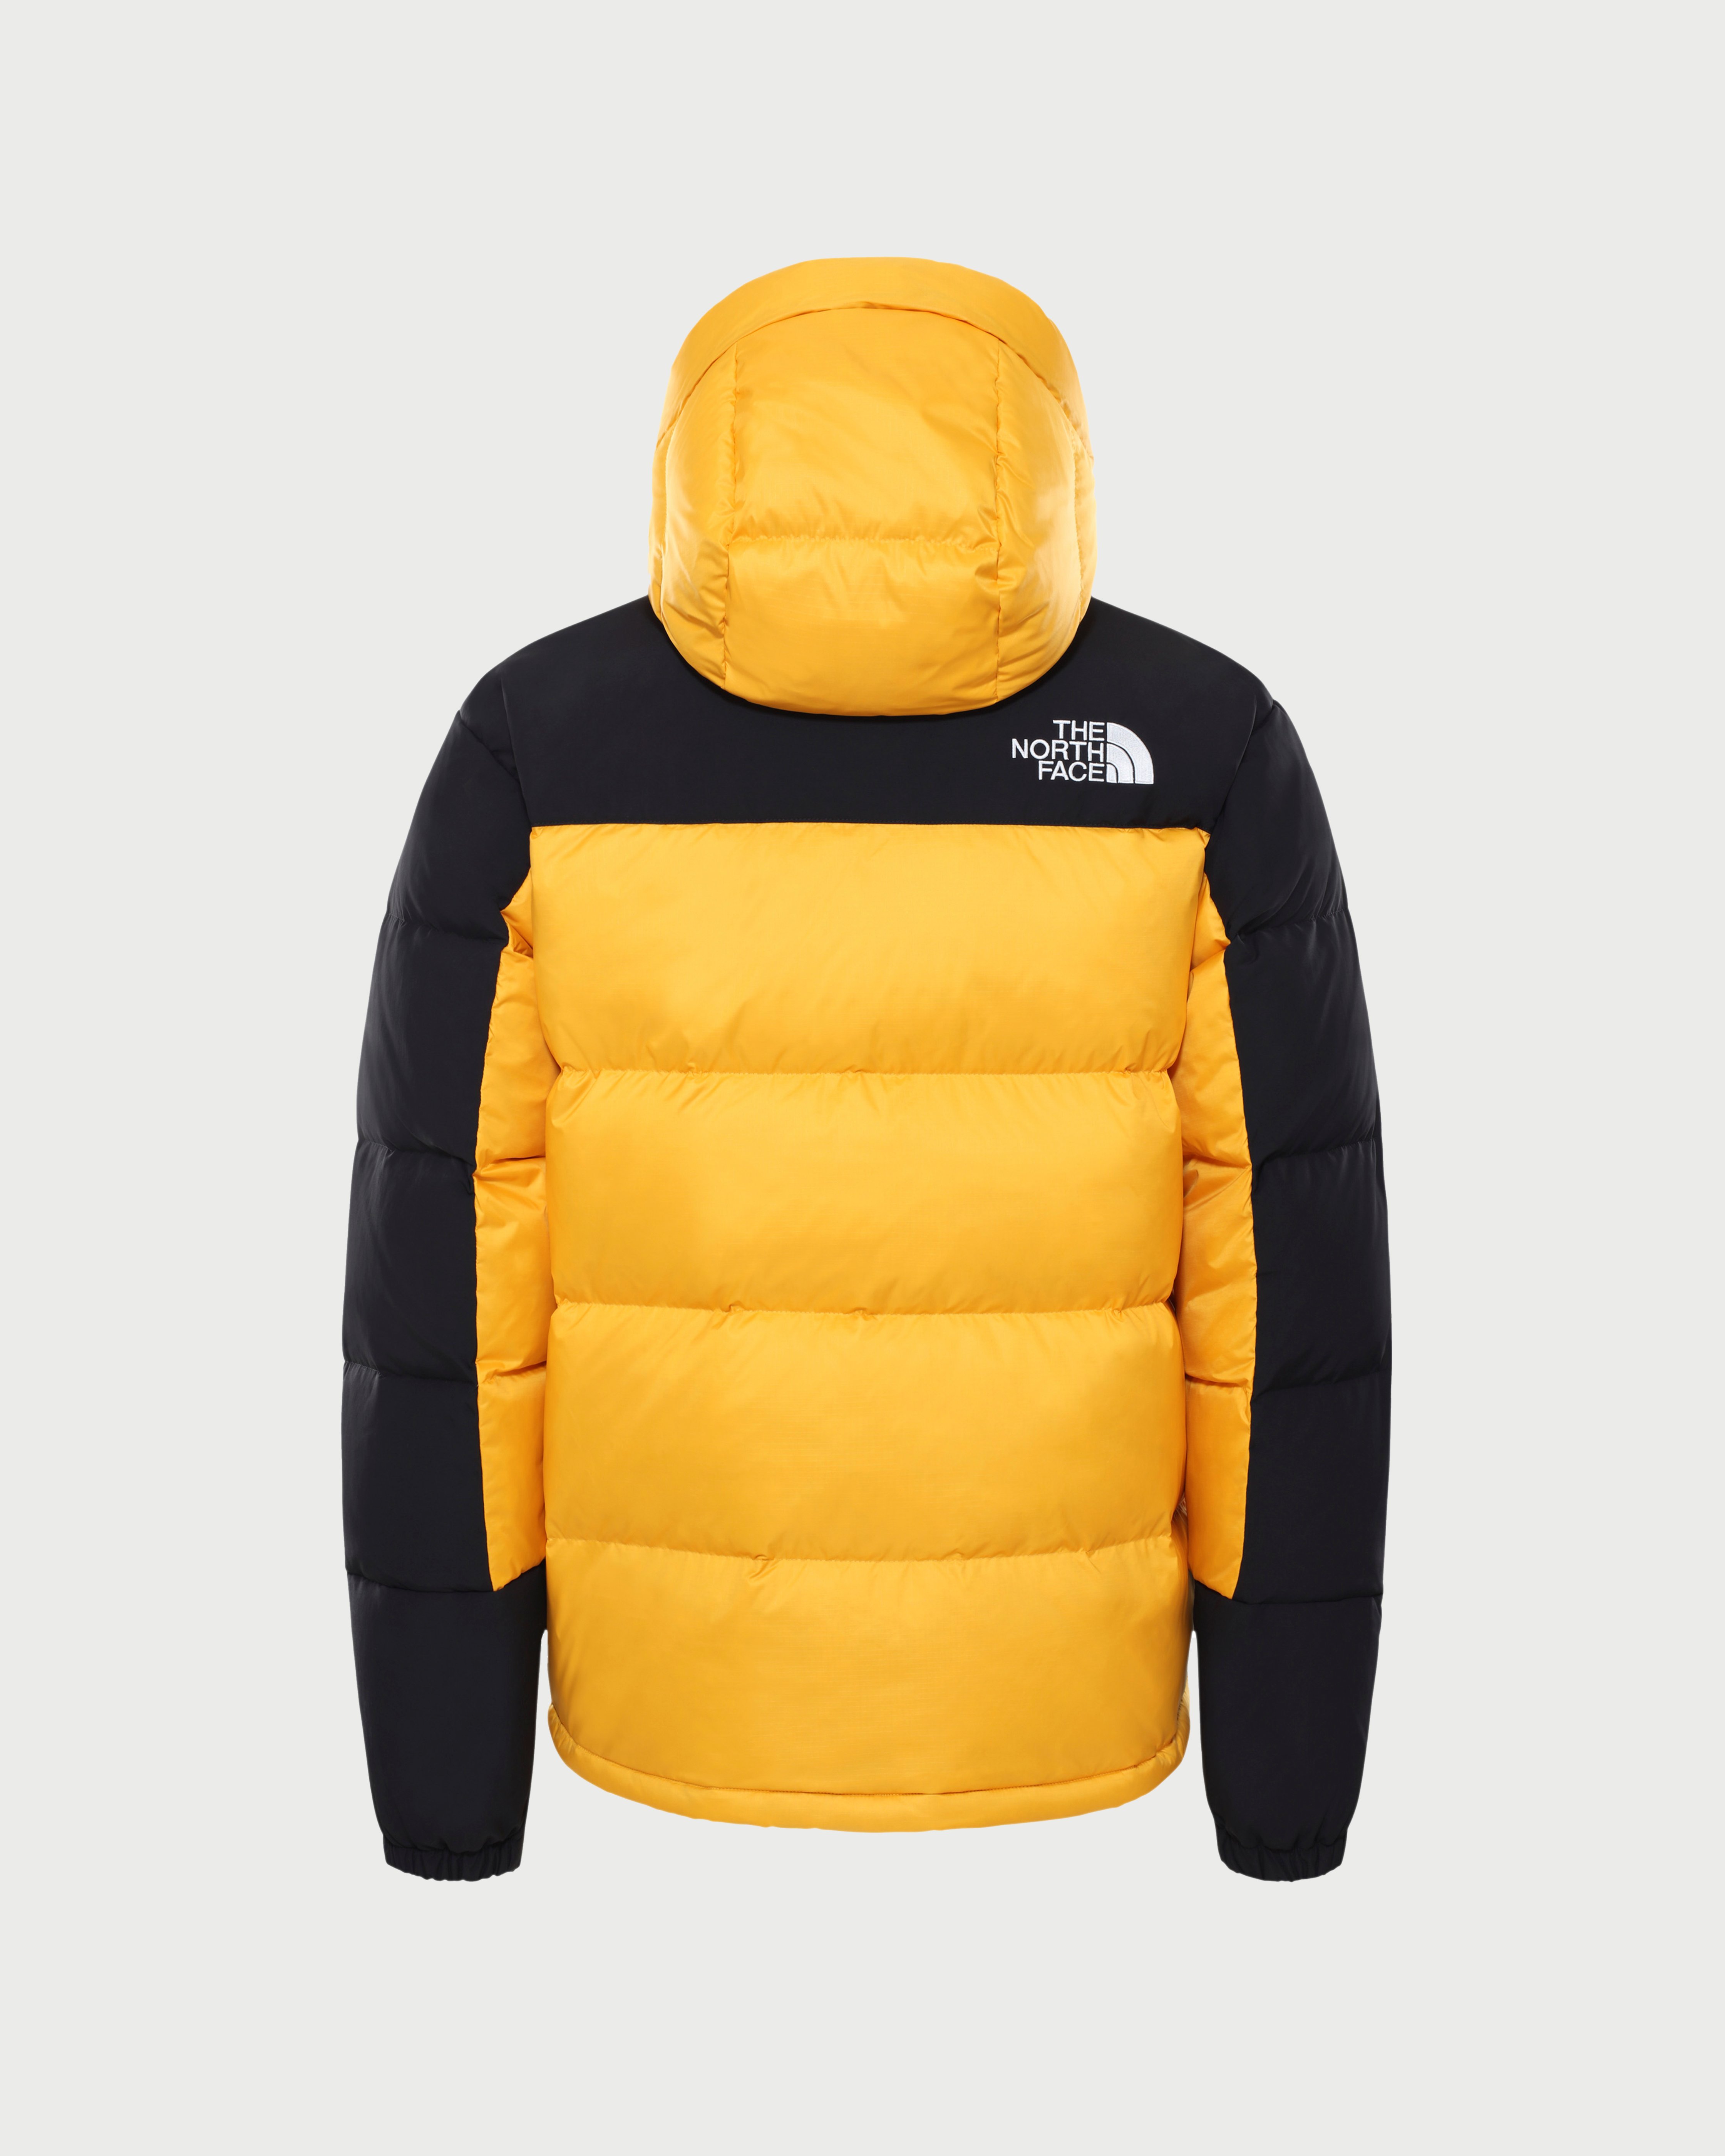 The North Face - Himalayan Down Jacket Peak Summit Gold Unisex - Clothing - Yellow - Image 2